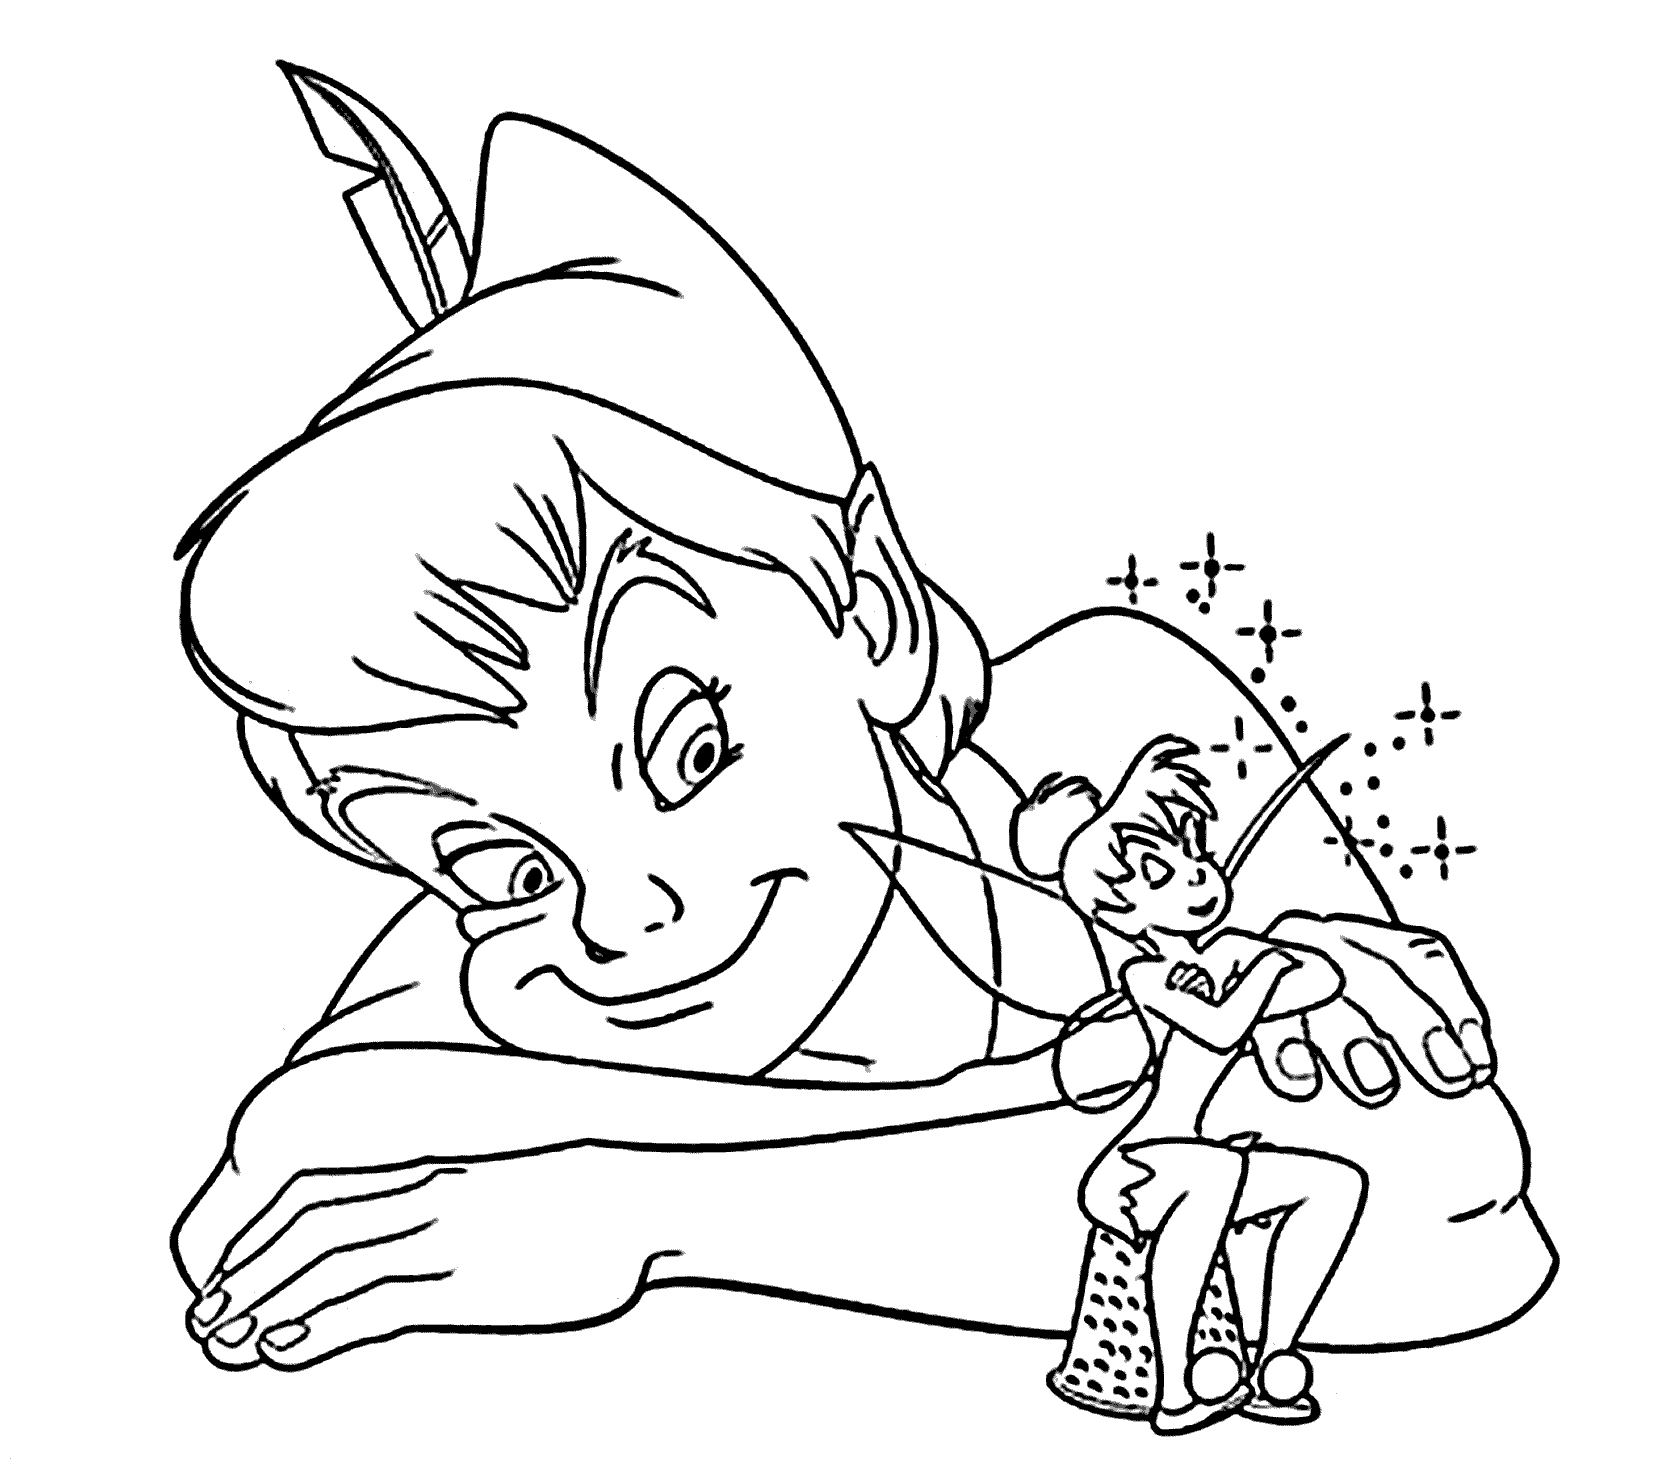 Disney Color Pages Free Coloring Ideas Free Disney Coloring Pages With Mickeyuse Pictures